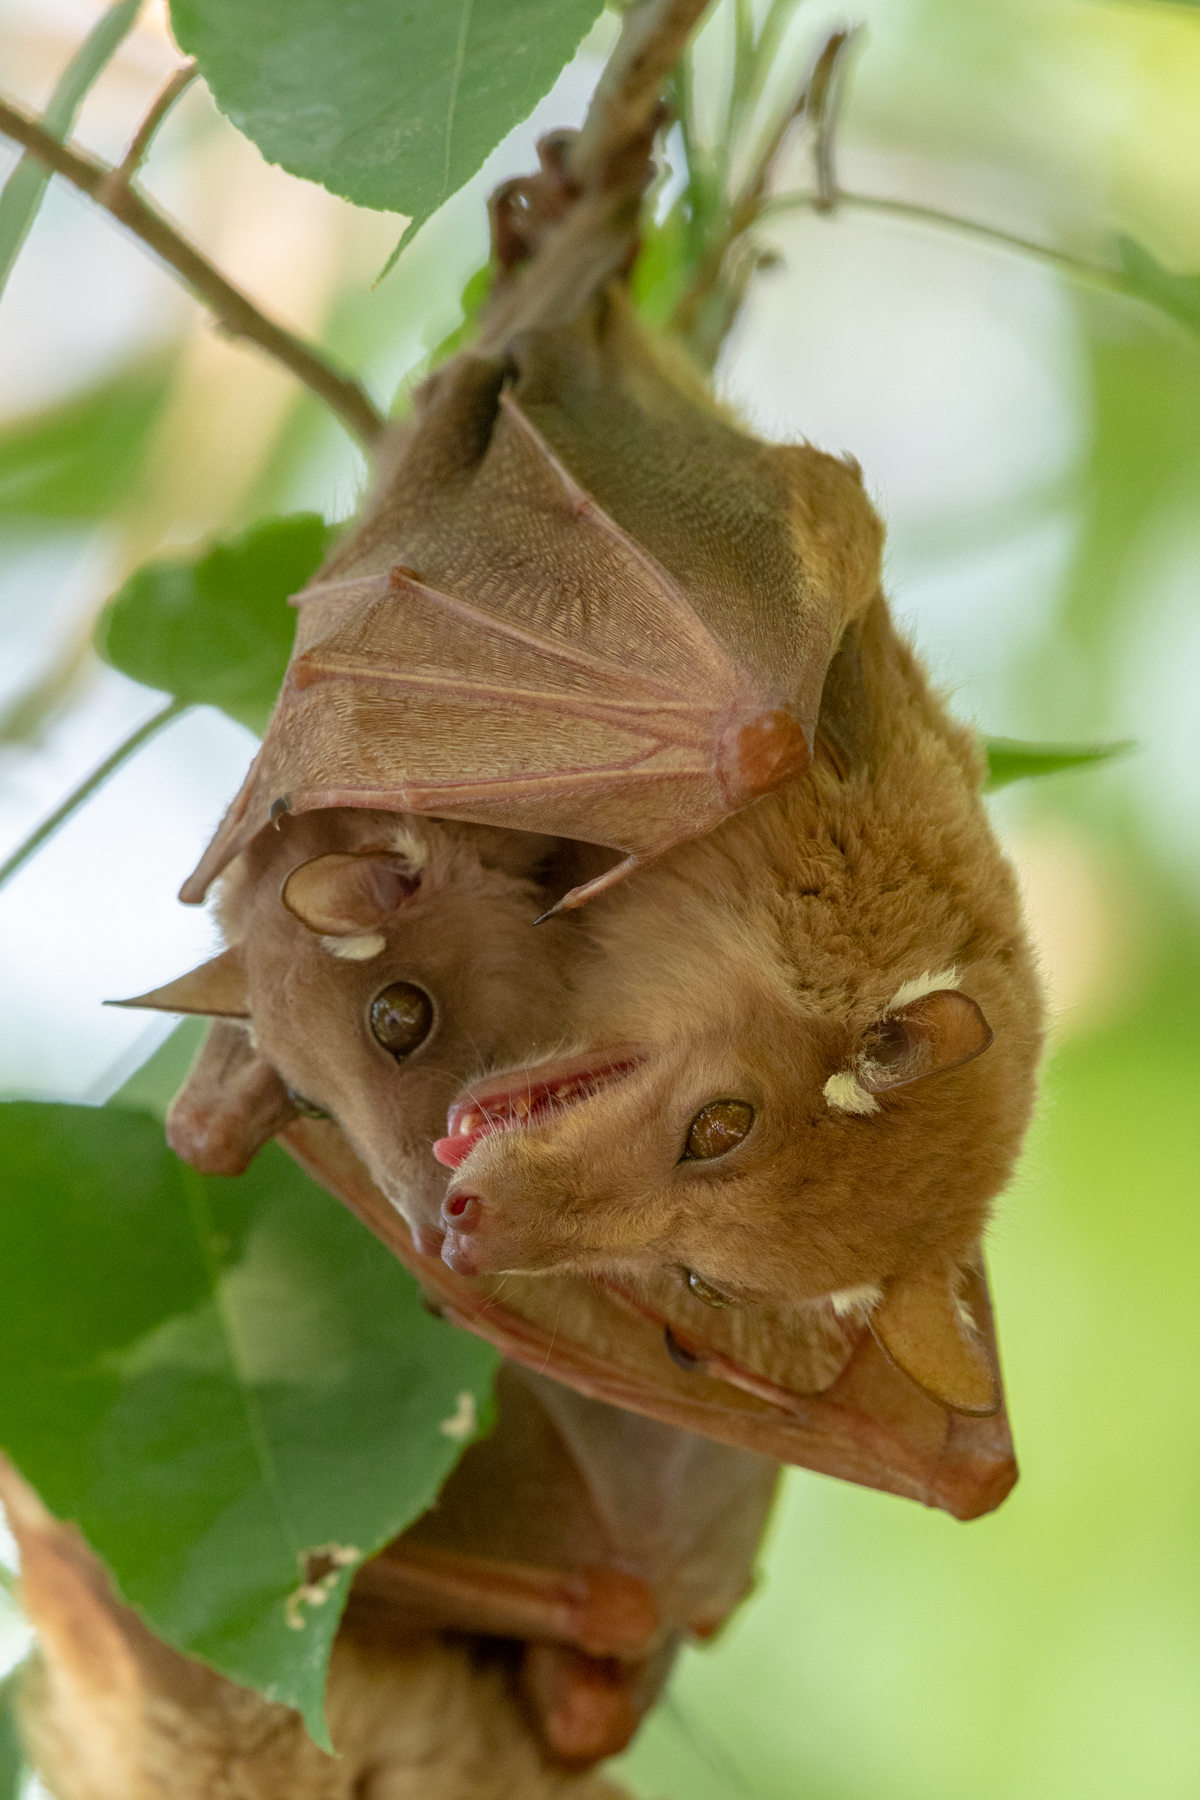 A Peters's Epauletted Fruit Bat mother cradles her baby with her wings